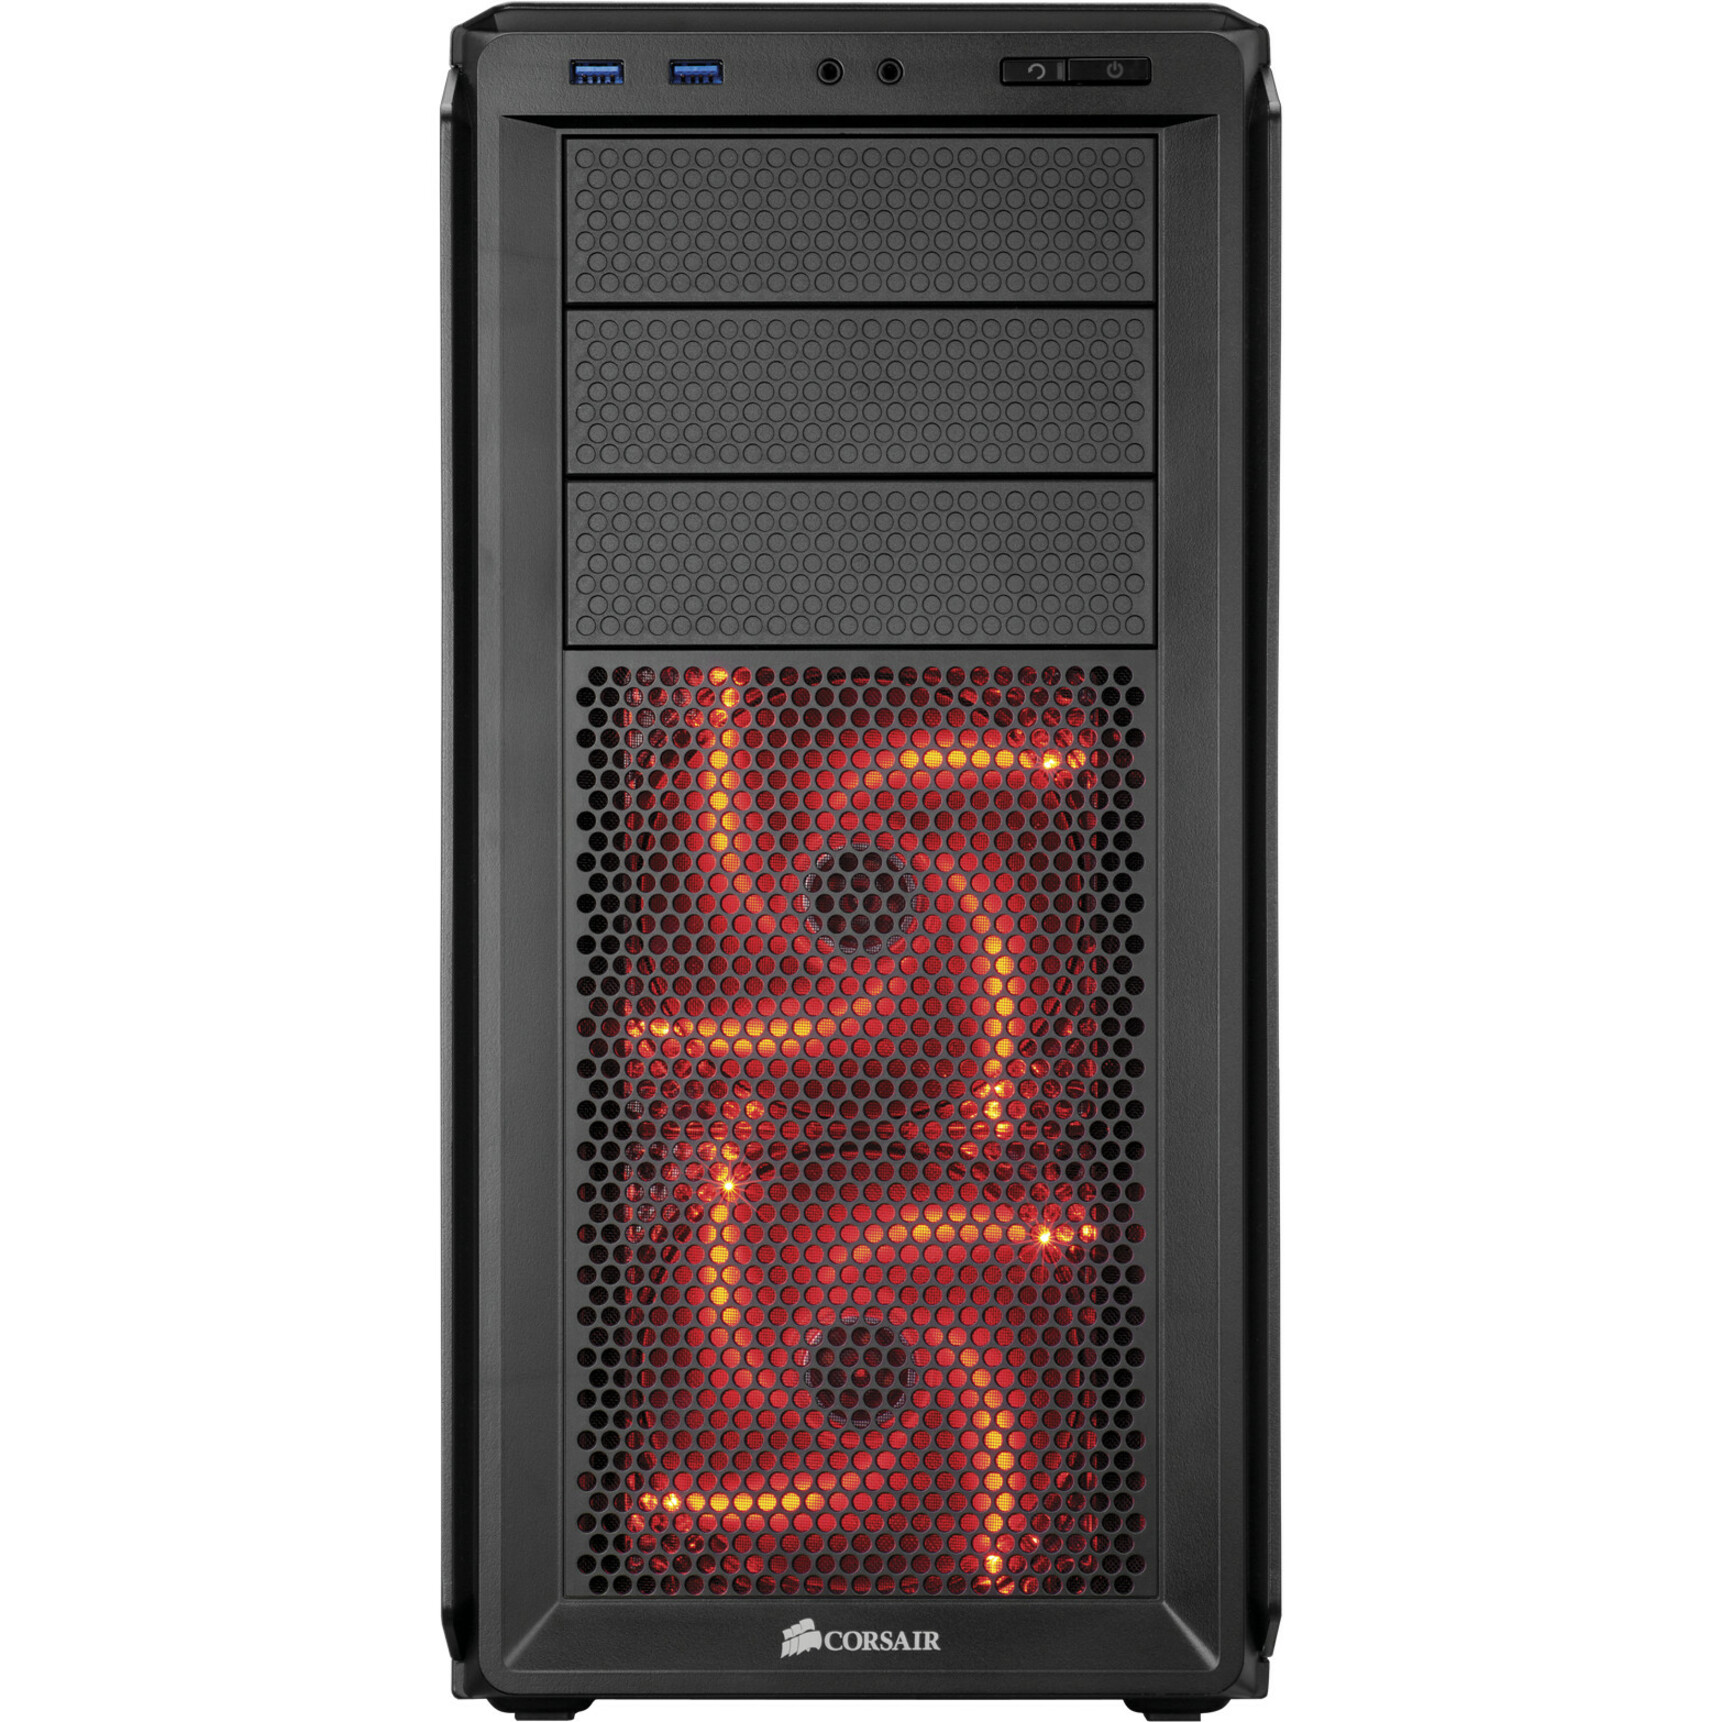 Corsair Graphite Series 230T Compact Mid Tower Case-Black - image 4 of 5